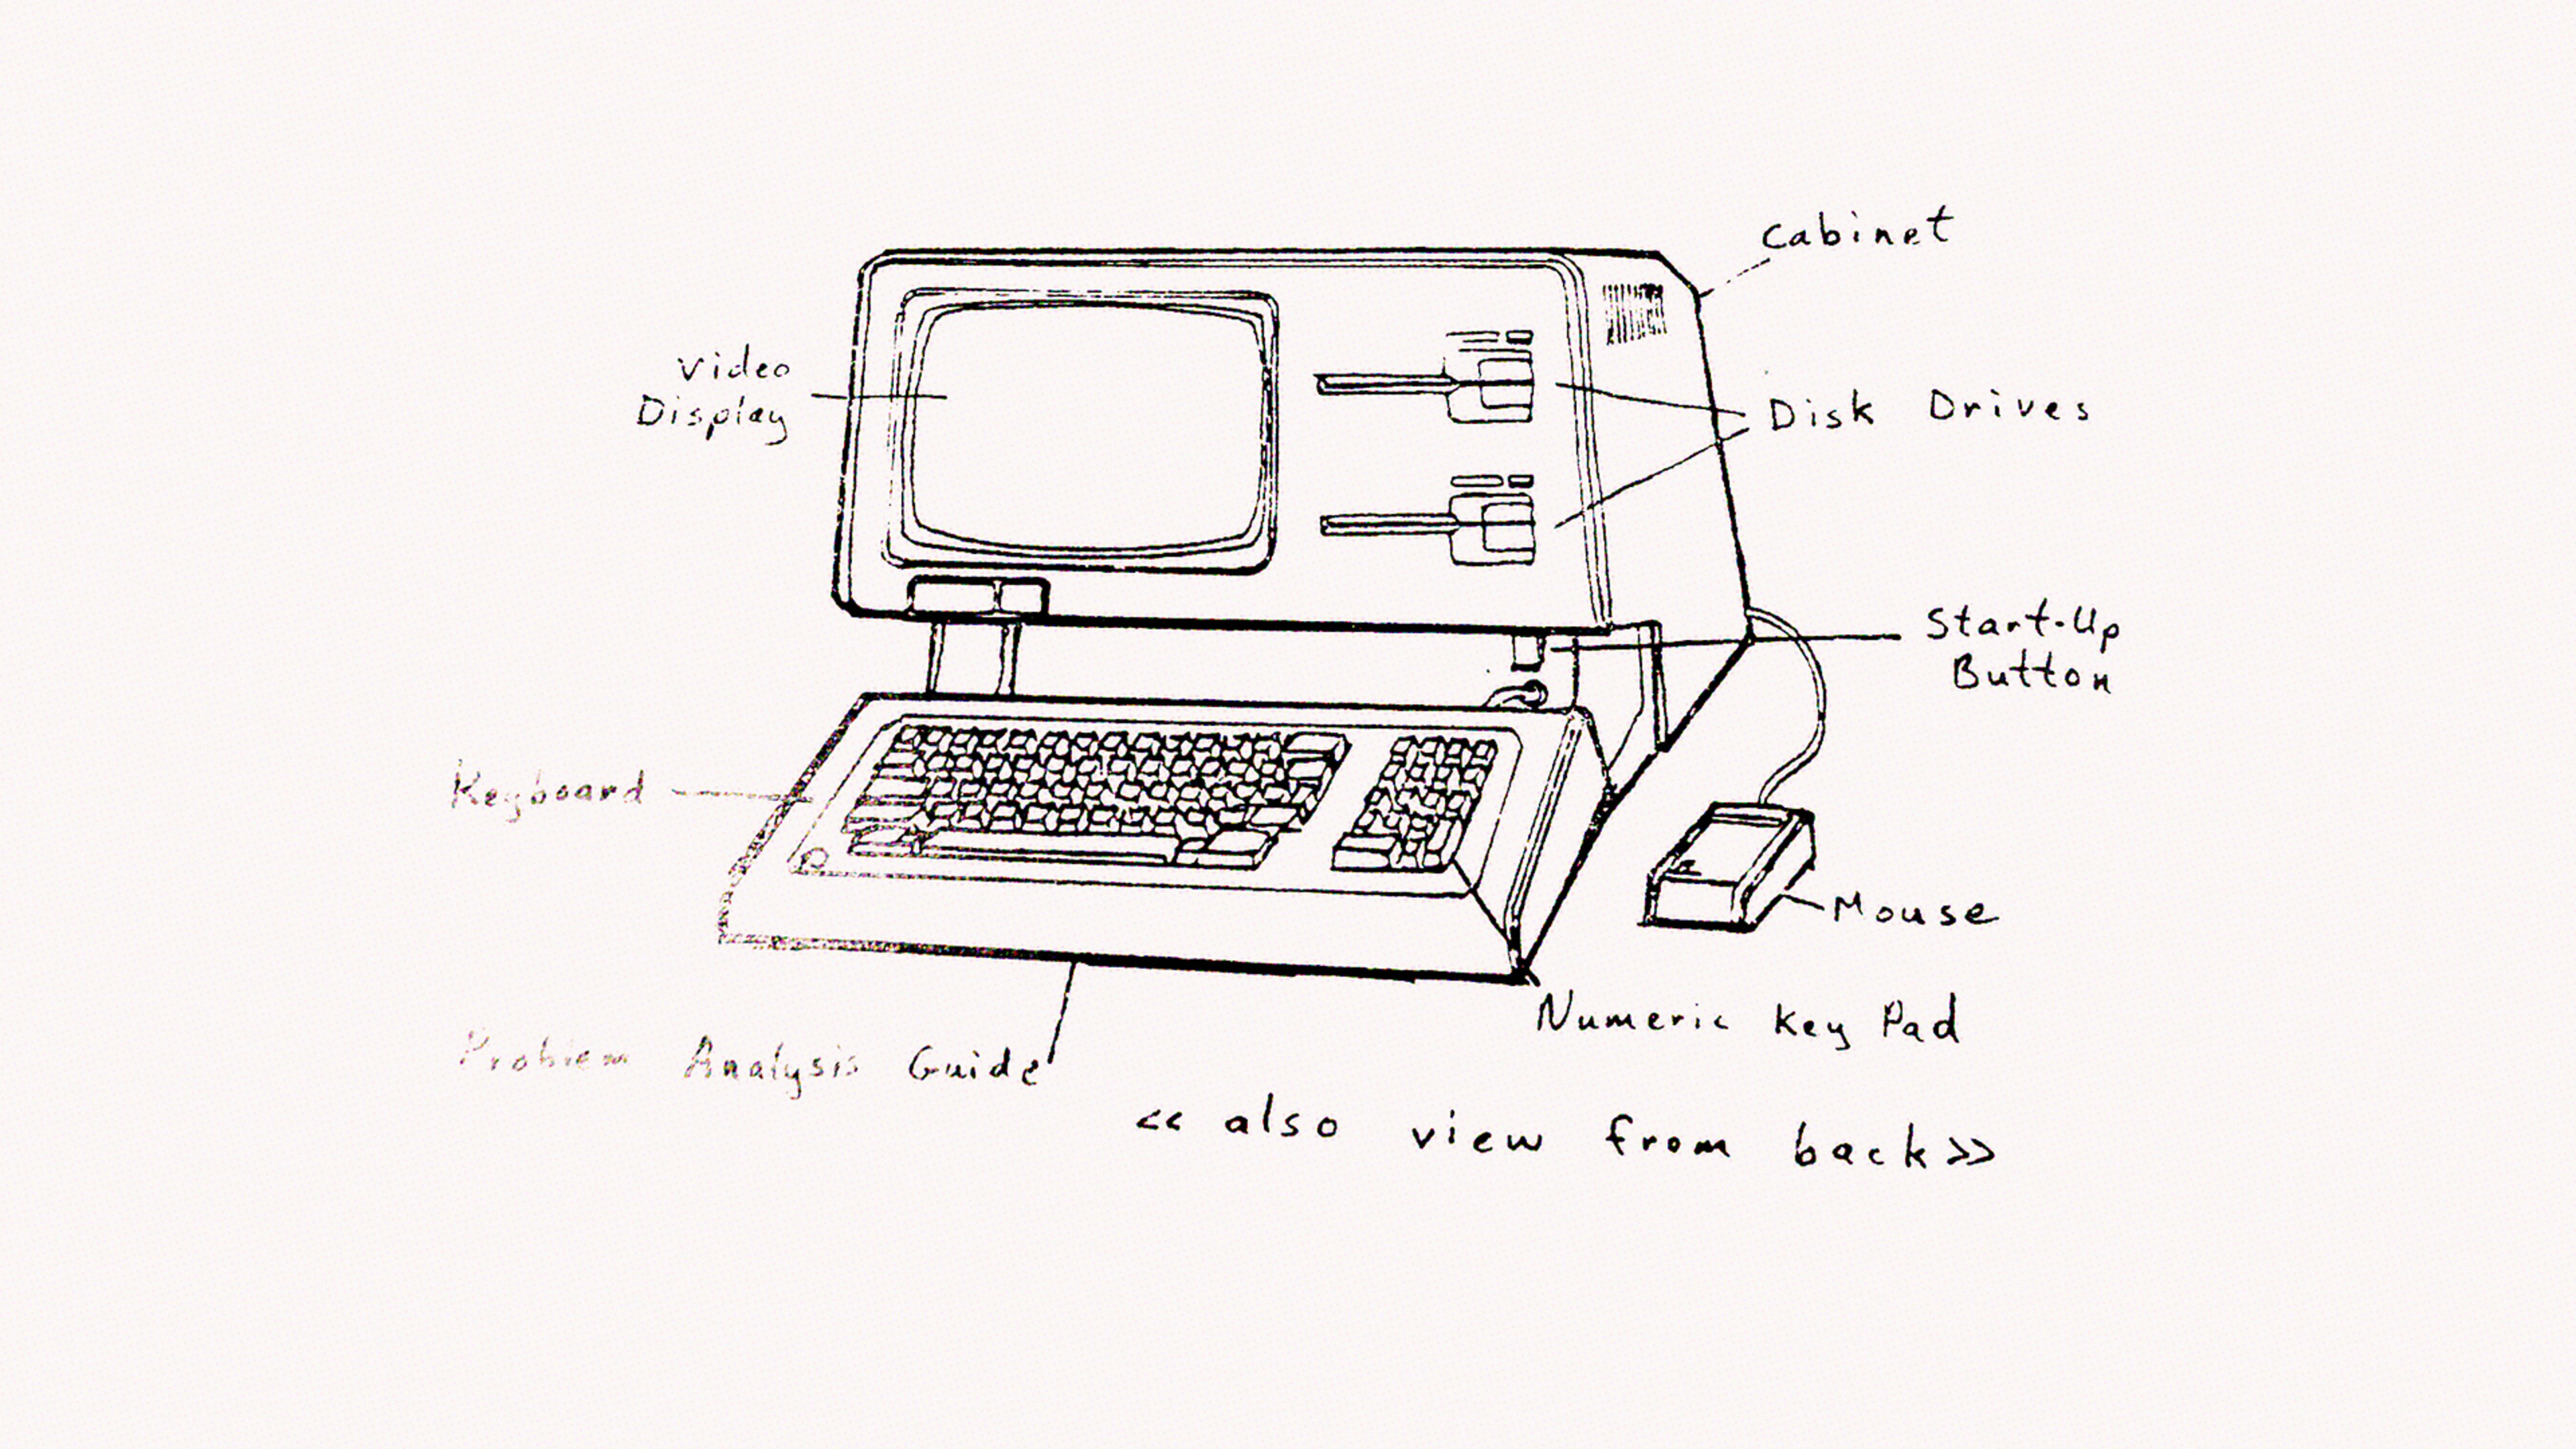 Take A Look At Four Decades Of Apple Artifacts